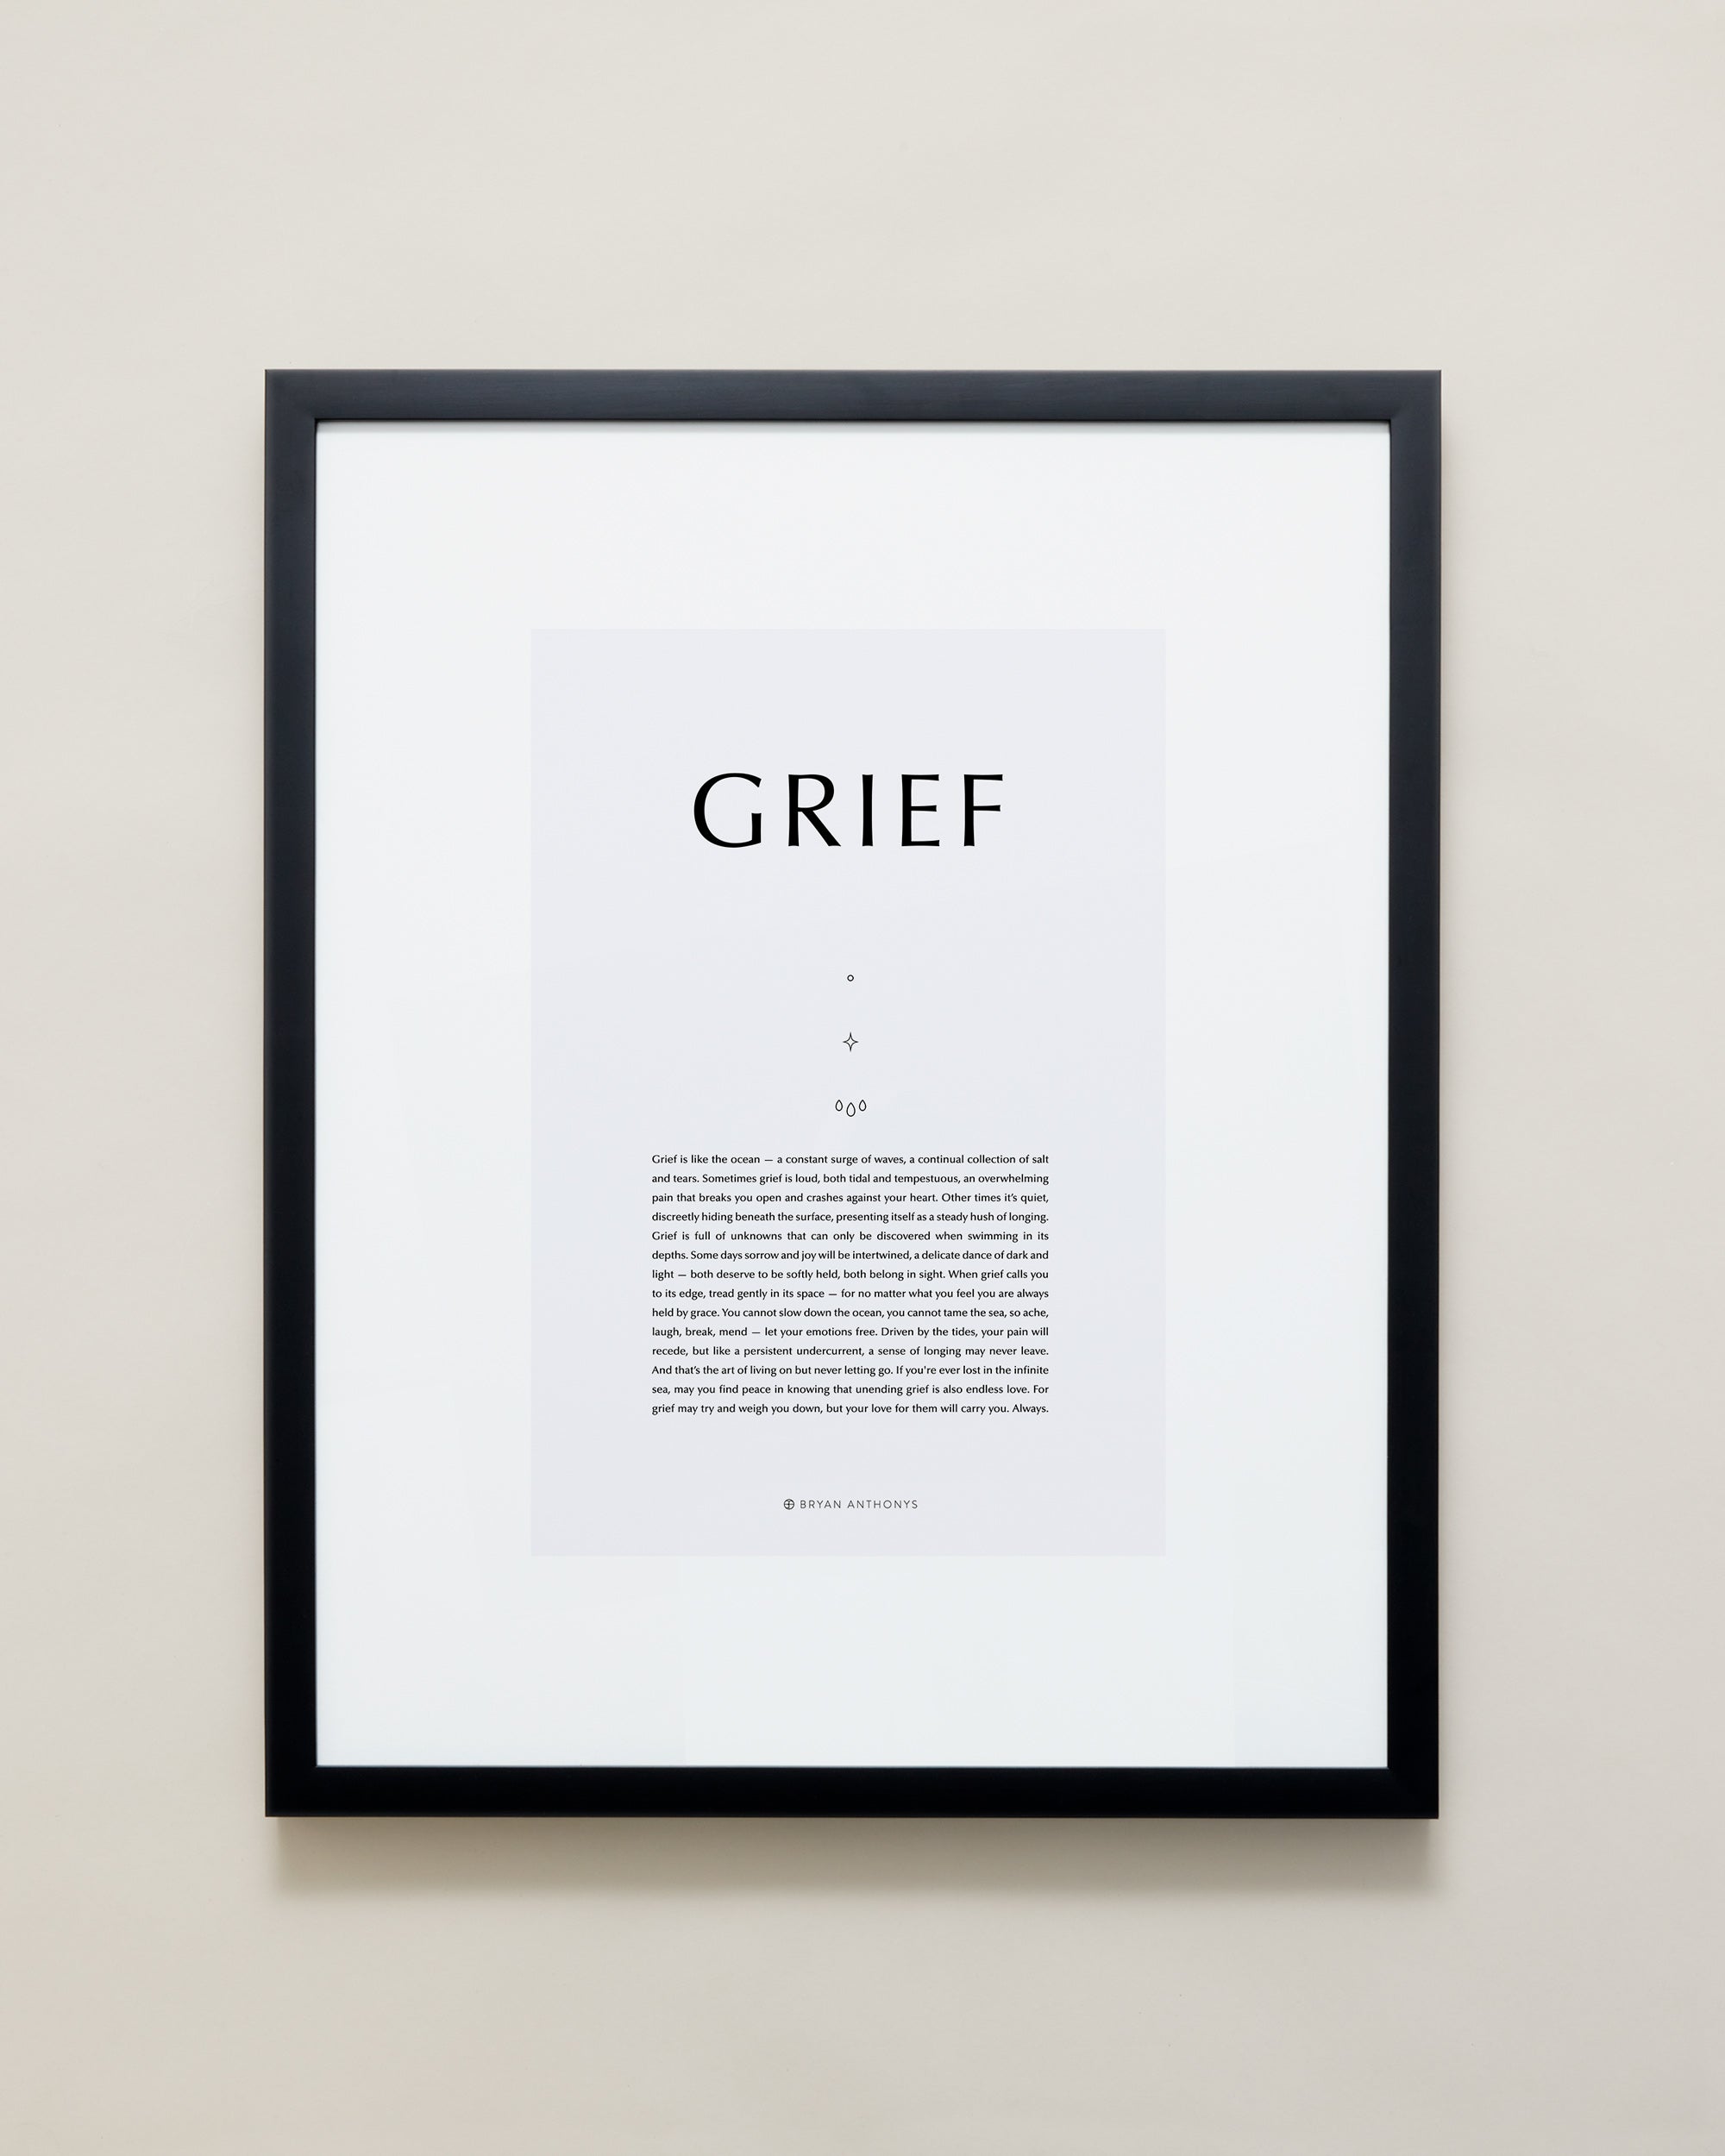 Bryan Anthonys Home Decor Purposeful Prints Grief Iconic Framed Print Gray Art With Black Frame 16x20